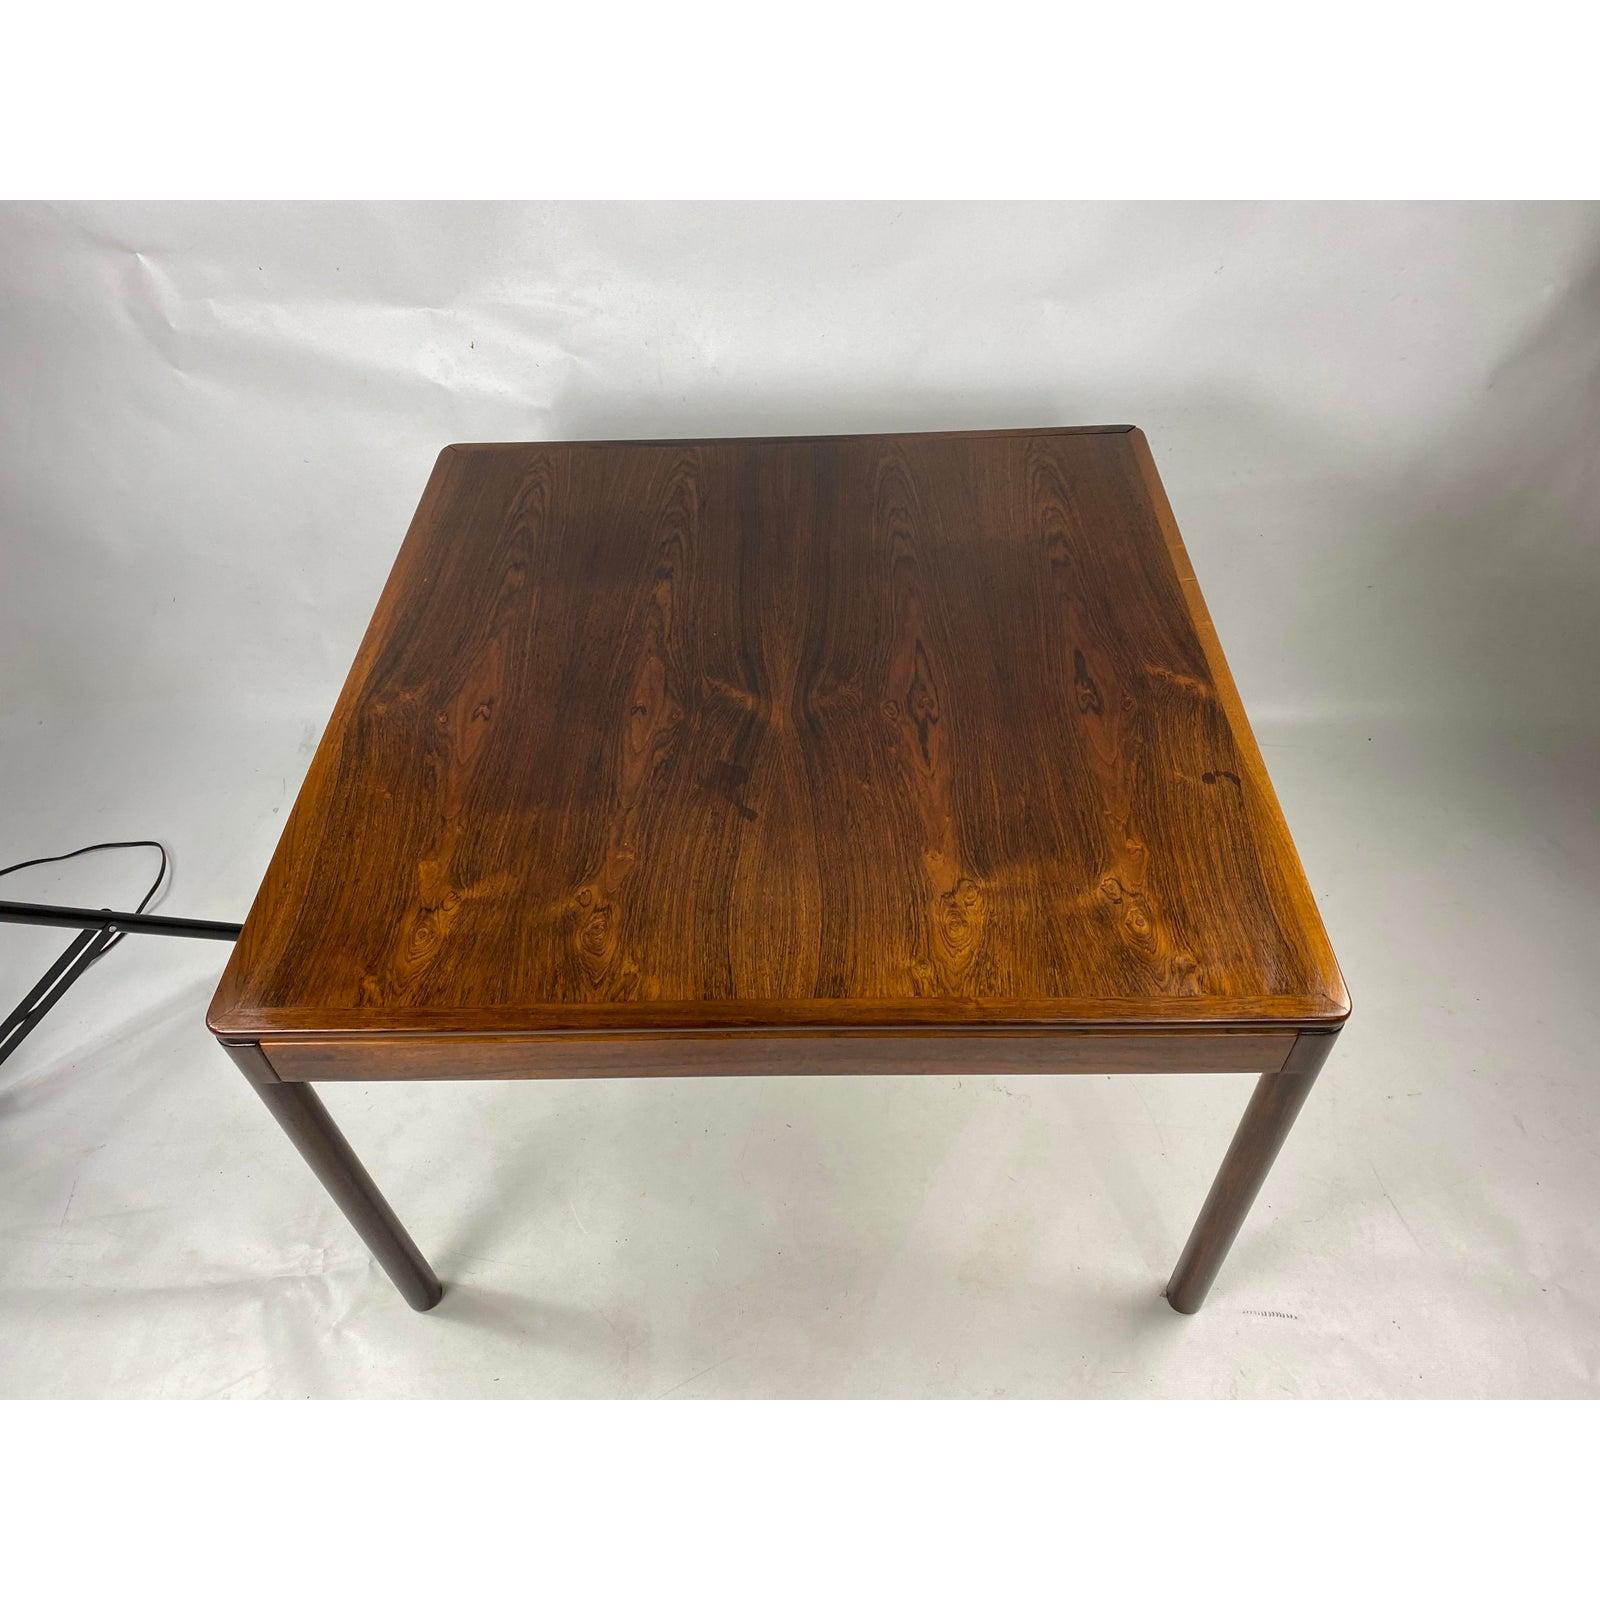 Great vintage solid rosewood table. Table is larger and could be used as a coffee table.
  